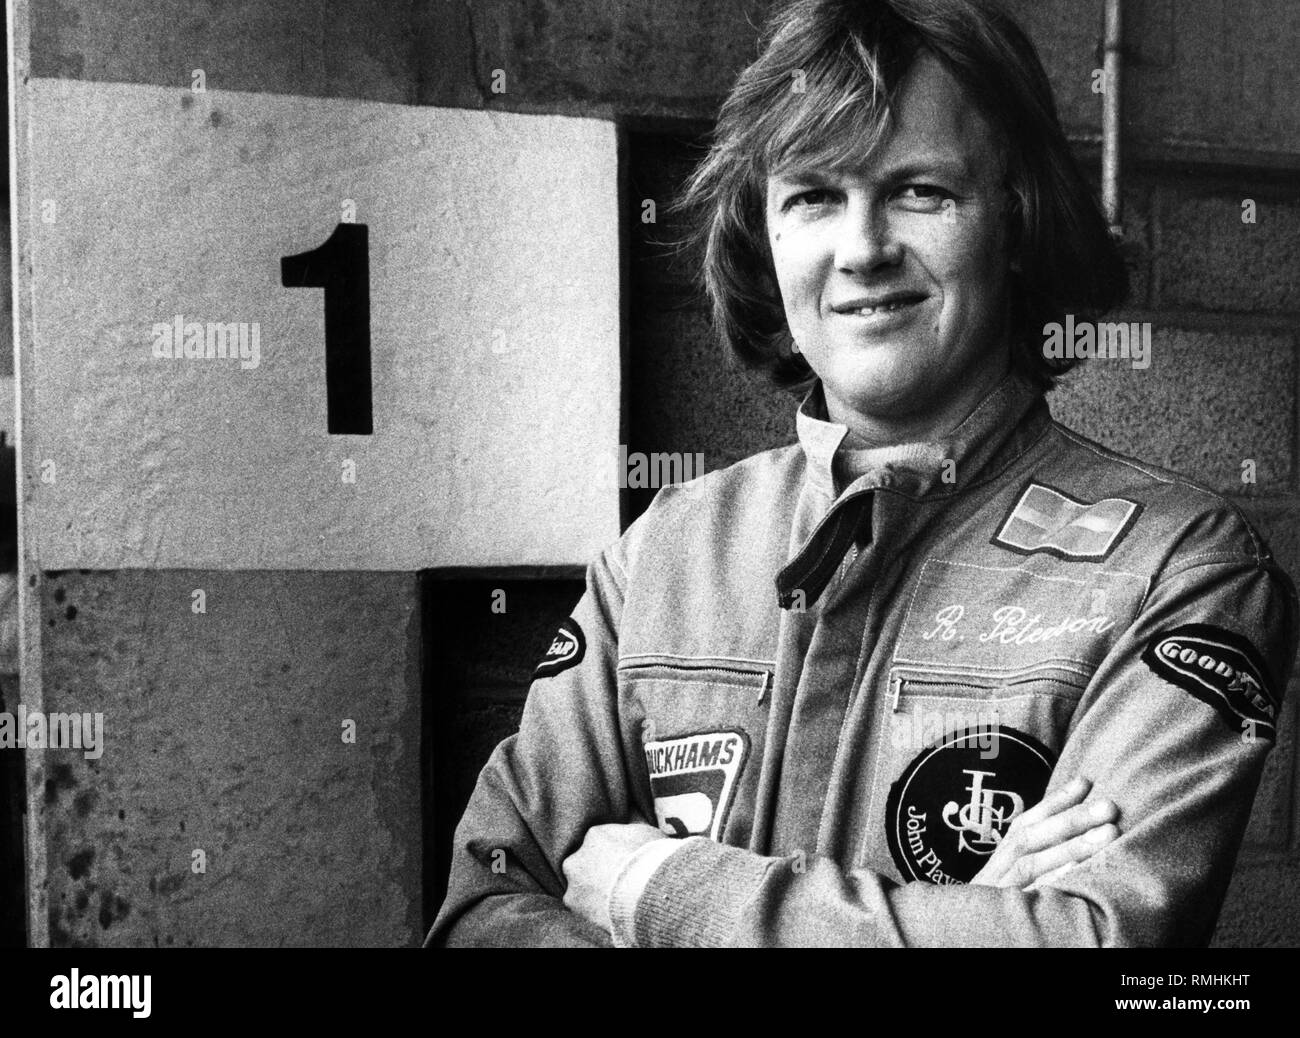 Racecar driver Ronnie Peterson Stock Photo - Alamy